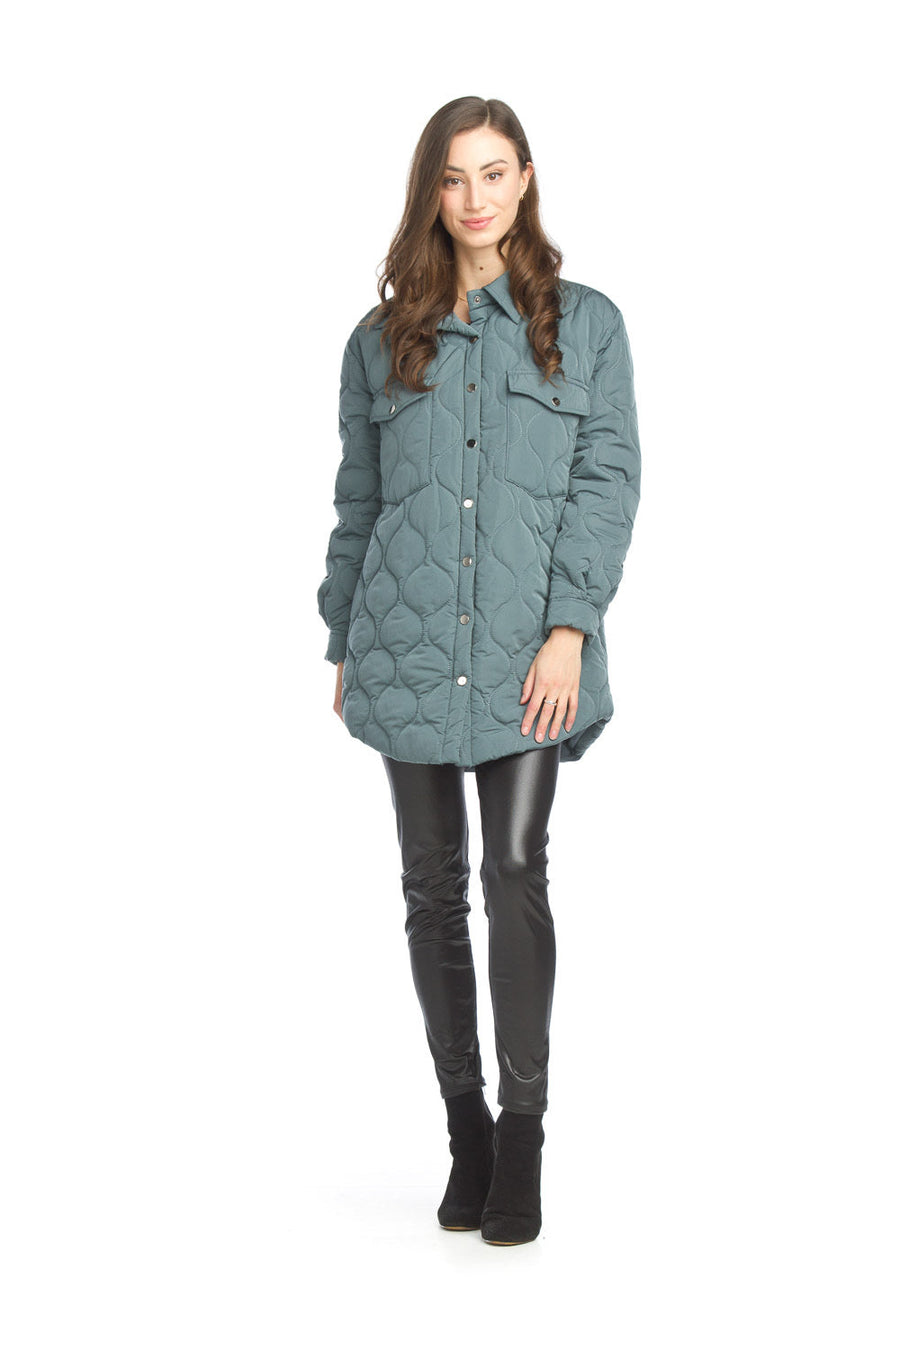 Papillon JT-13744 Quilted Shacket - Teal